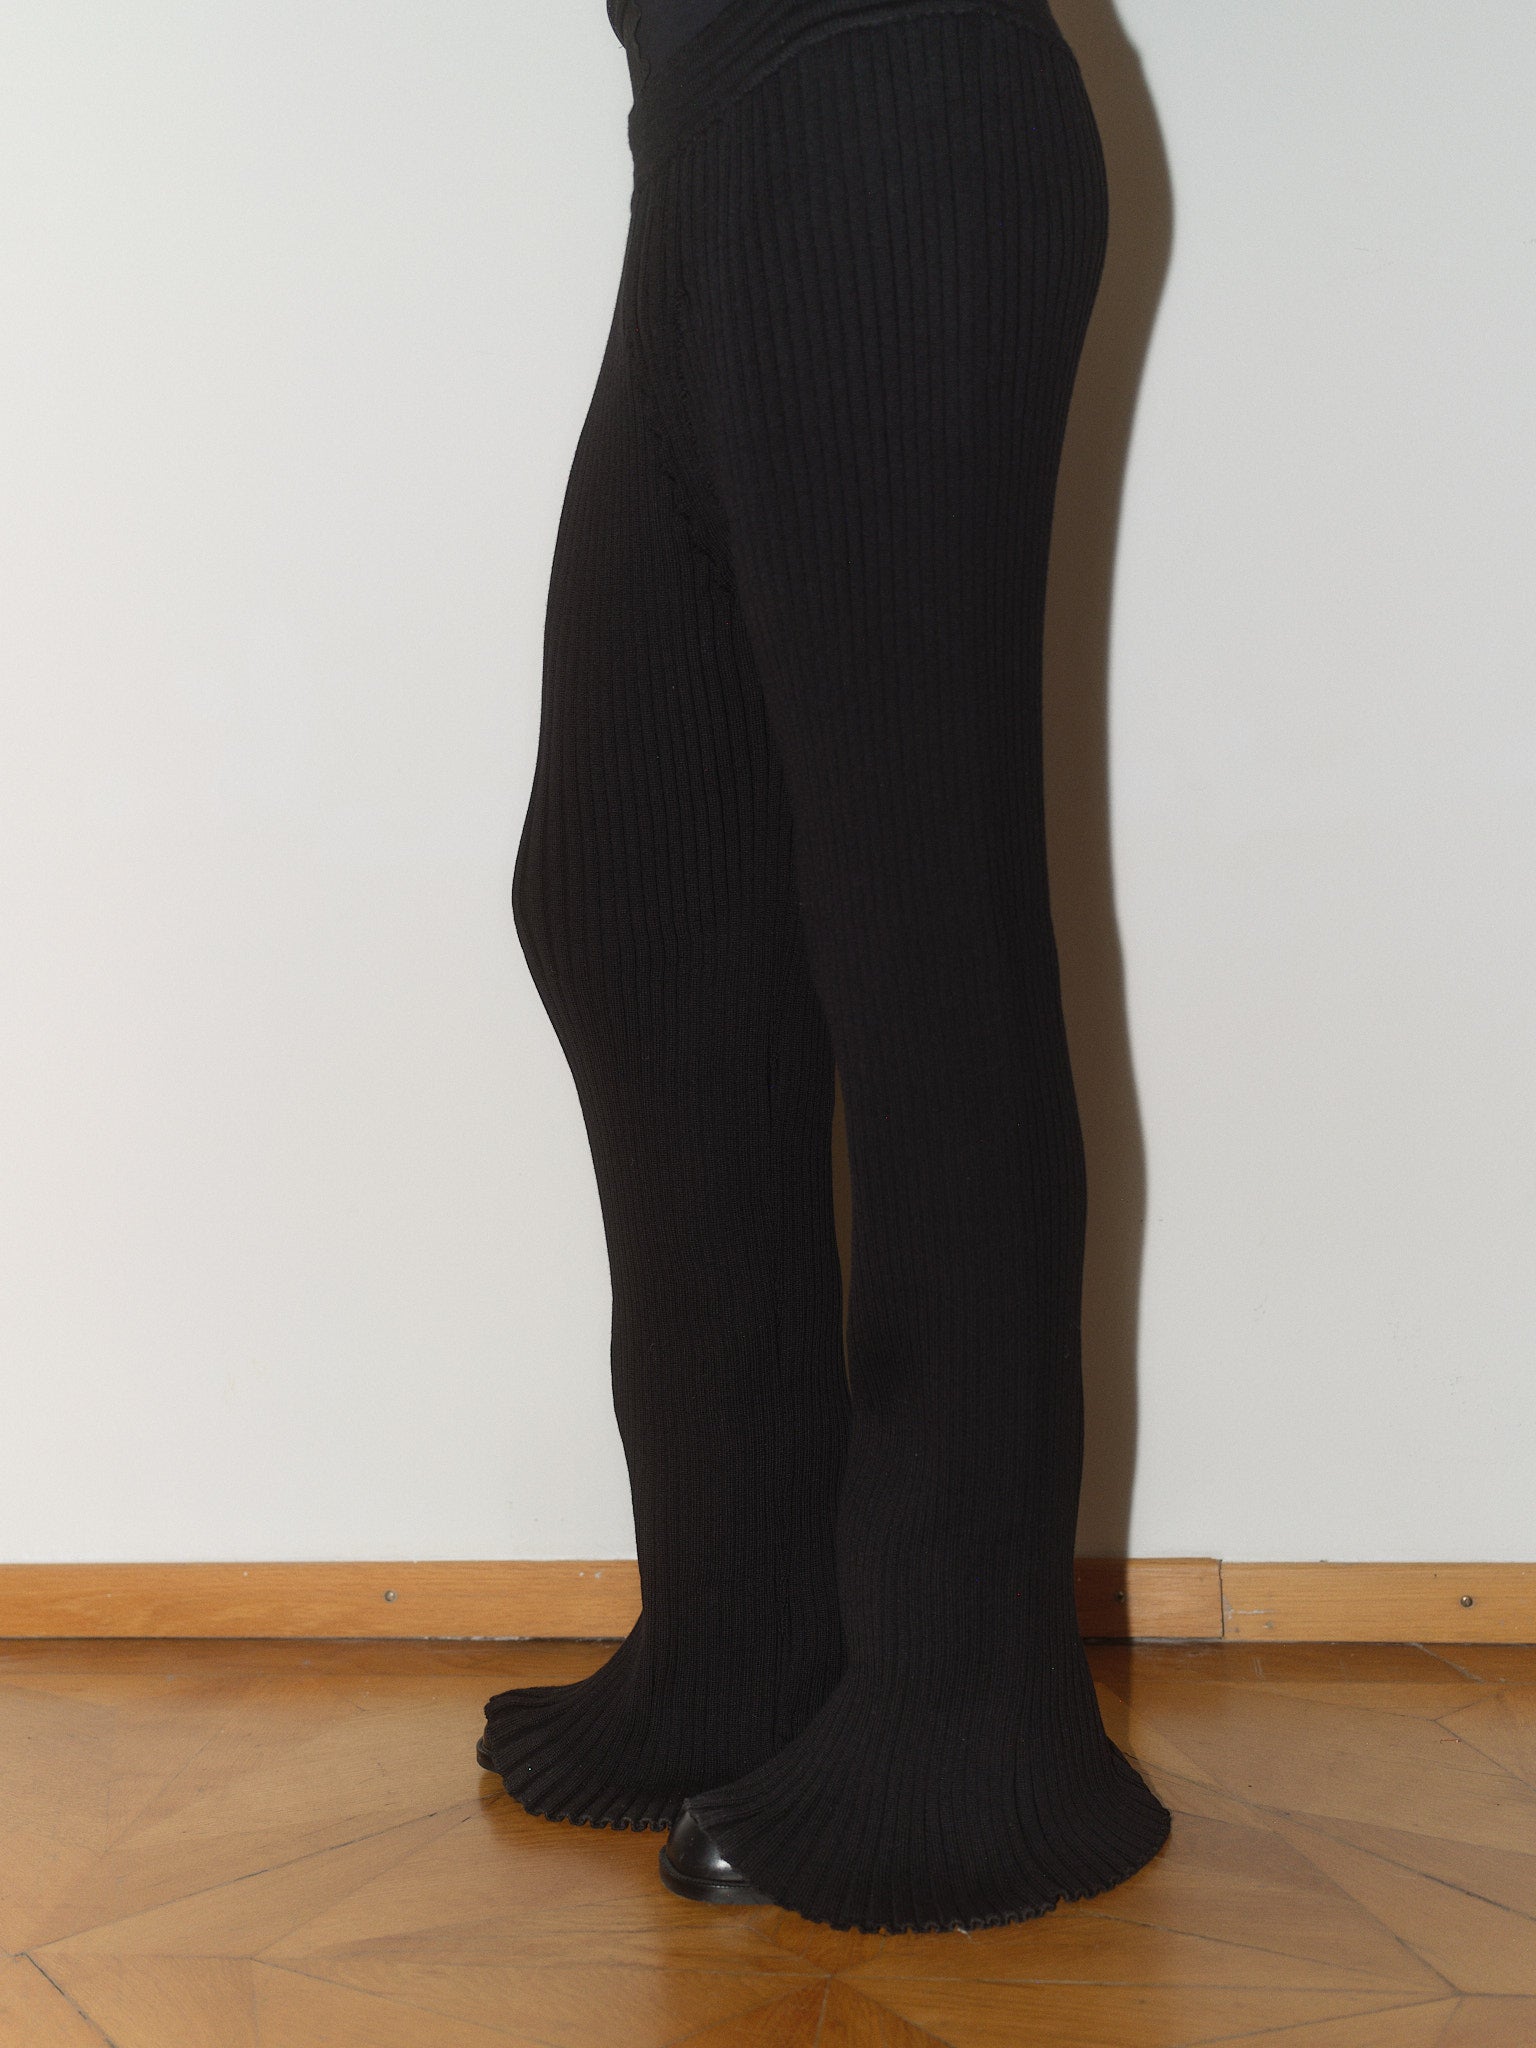 Ribbed Wool Pants designed by Christina Seewald. Sustainable, designed and made in Europe. Best Quality Yarns from Italy.